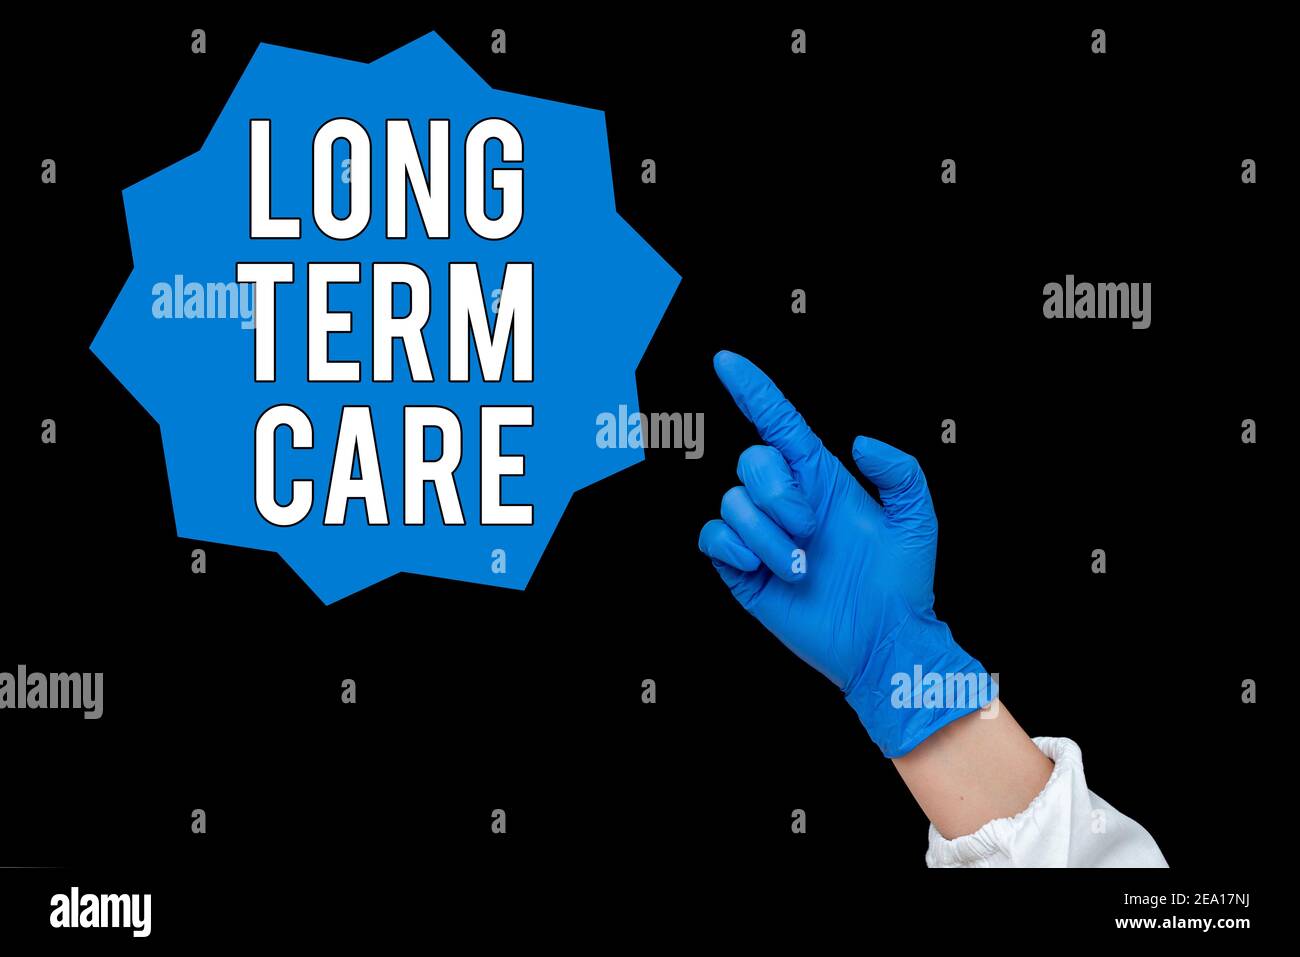 Conceptual hand writing showing Long Term Care. Concept meaning assistance with the basic an individualal tasks of everyday life Empty sticker paper a Stock Photo